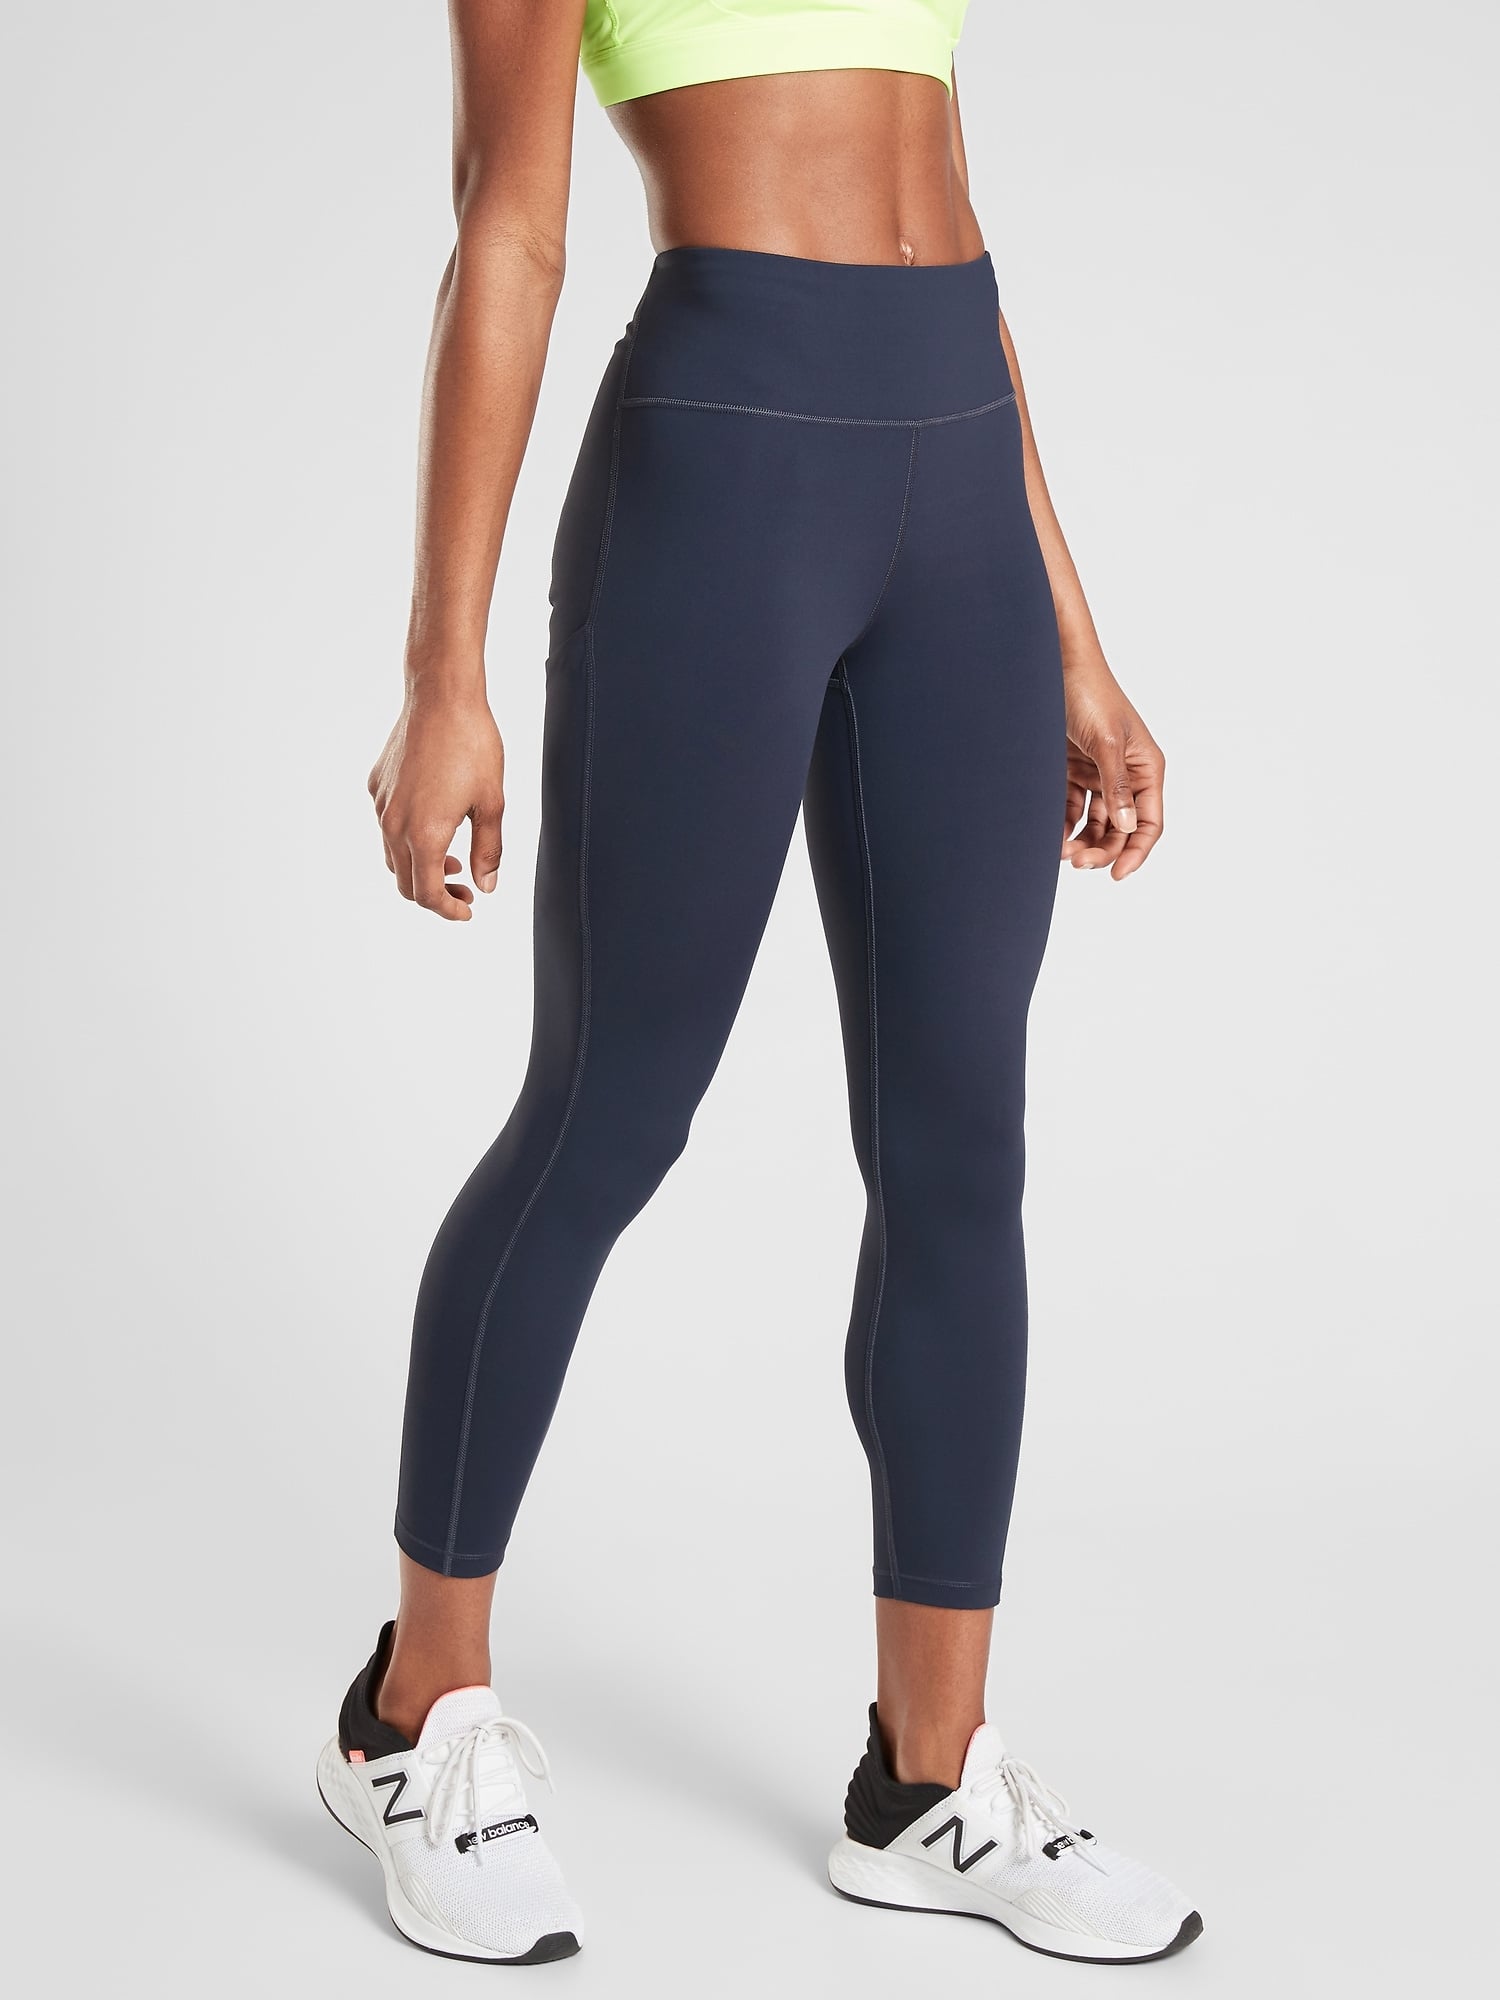 ATHLETA NAVY BLUE FLORAL AND MESH TIGHTS